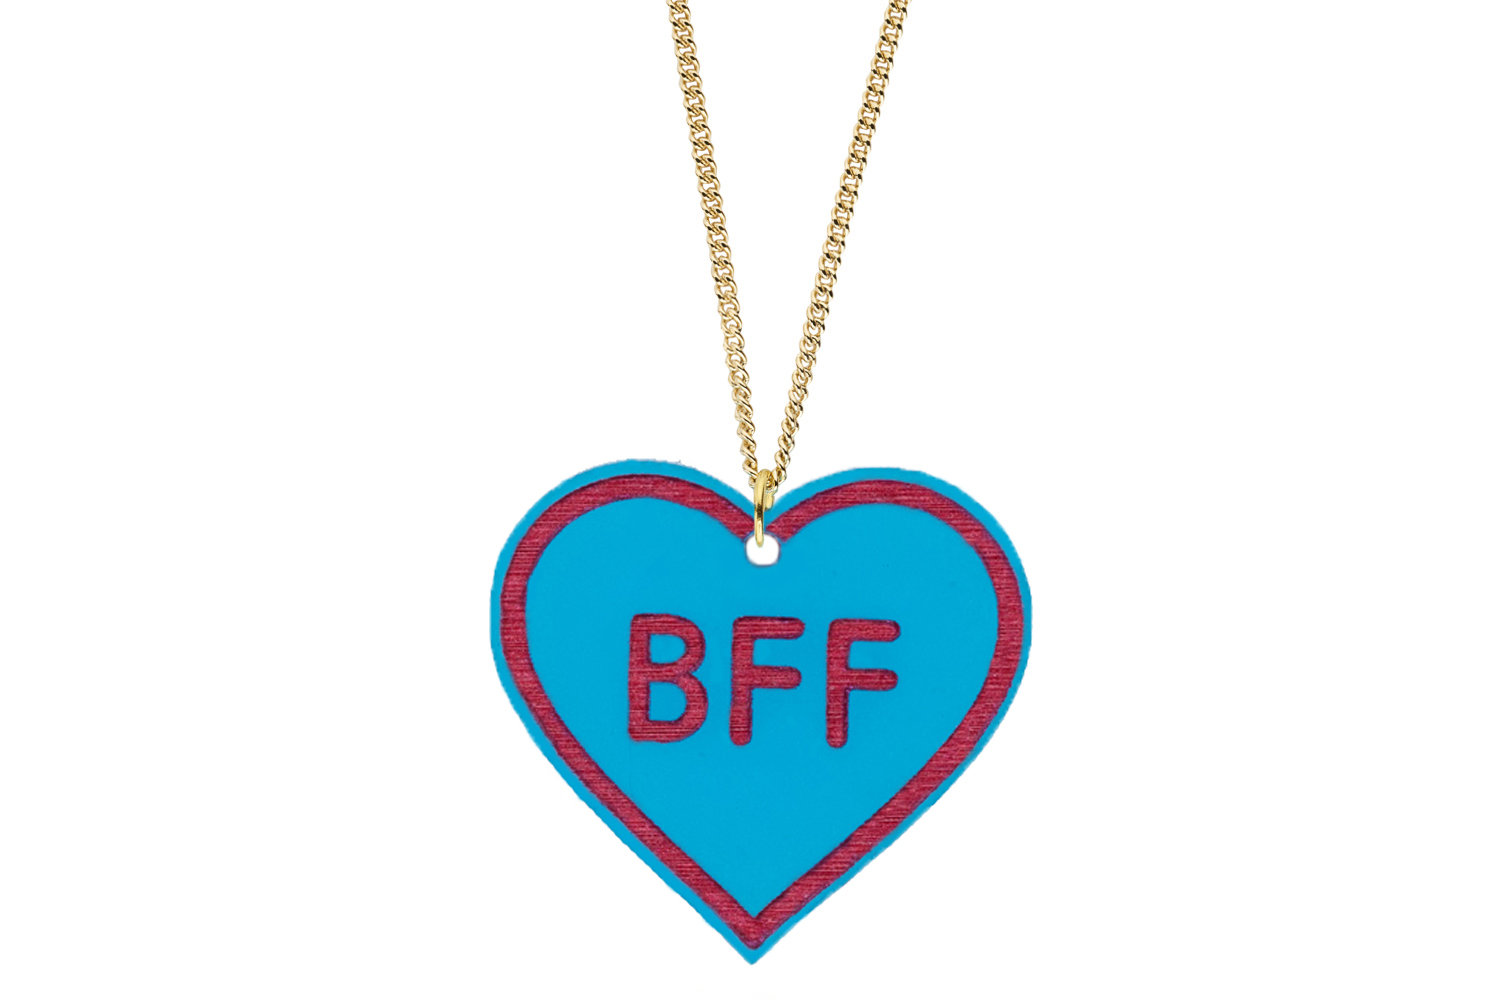 Heart with BFF Pendant Carved Style Refined with Paint on Chain Necklace